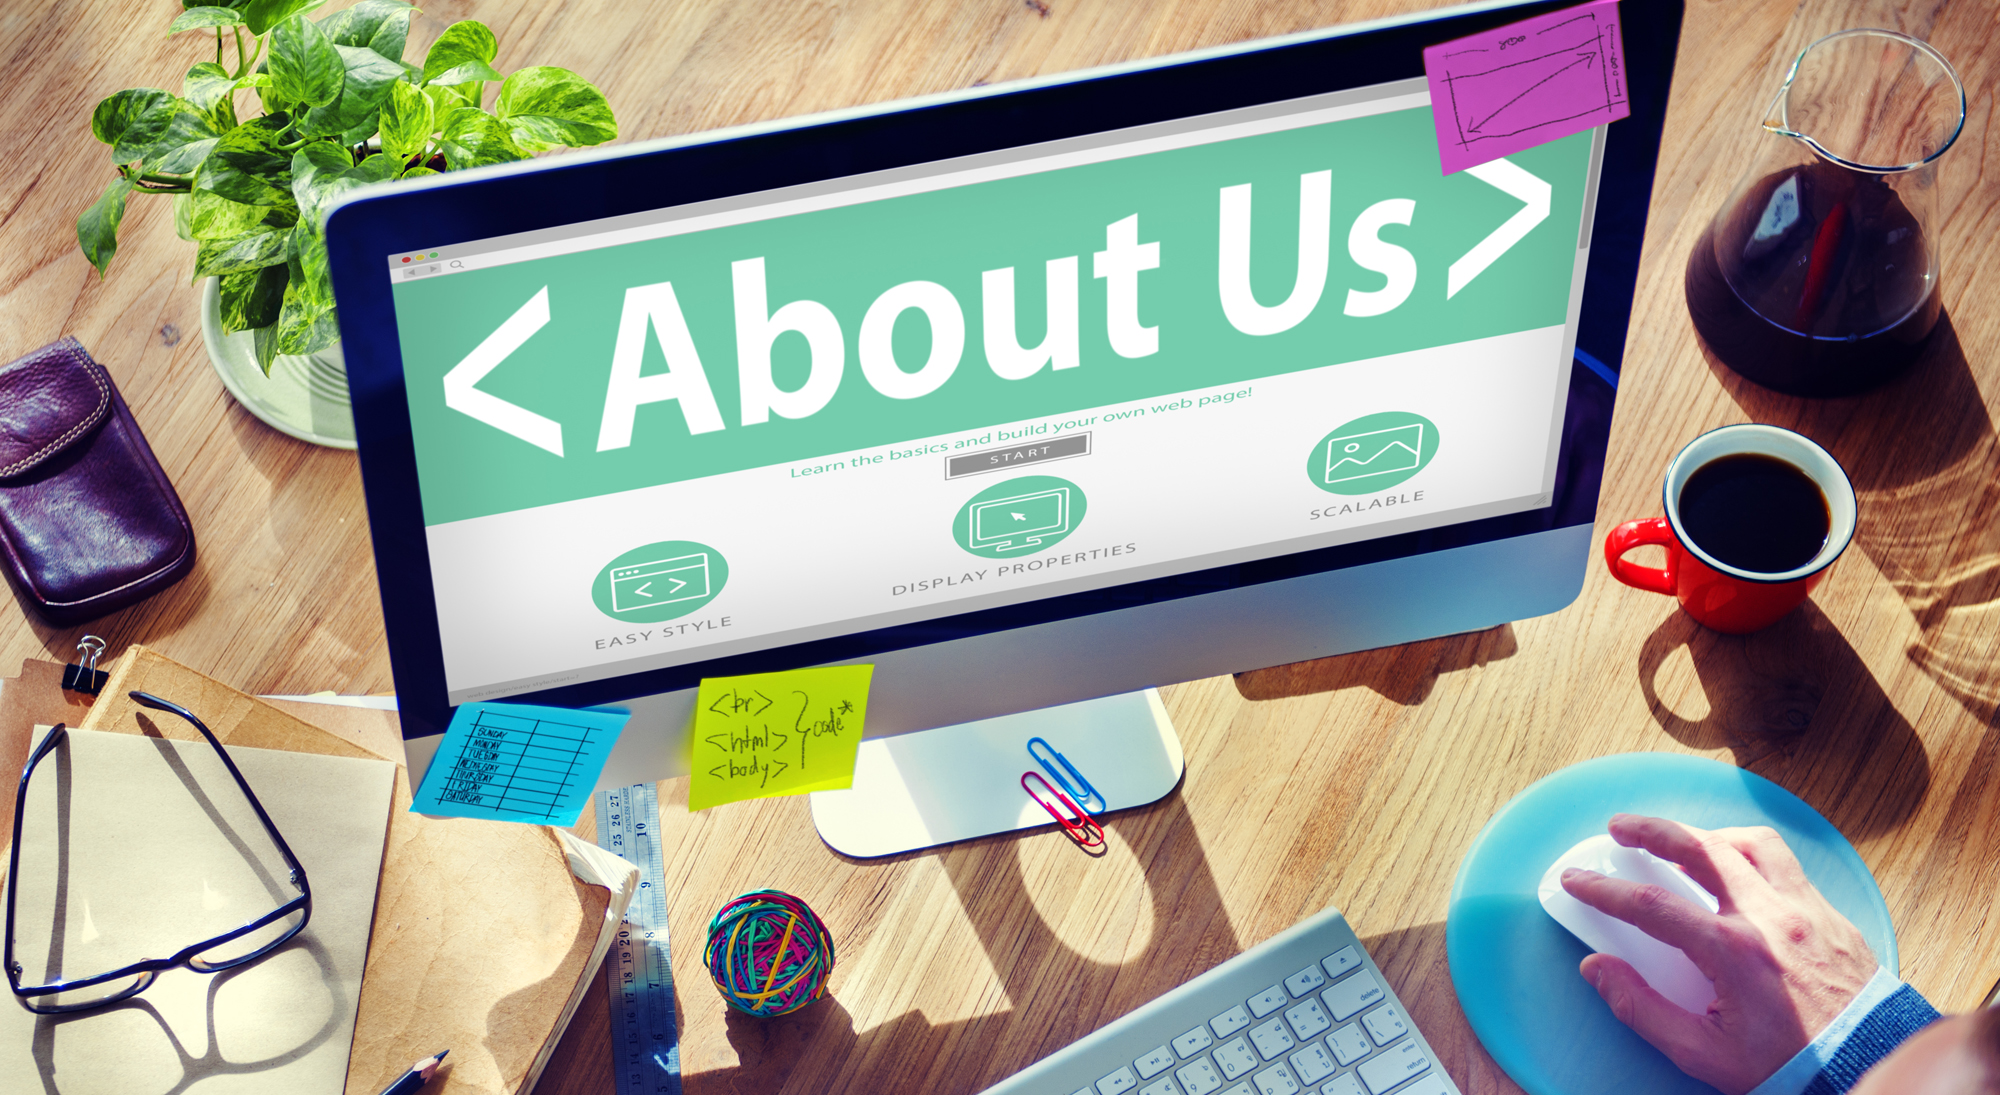 We are a passionate team dedicated to providing the best possible digital web service to our clients including; website design & development, search engine optimization, eCommerce solutions, social media management and more.